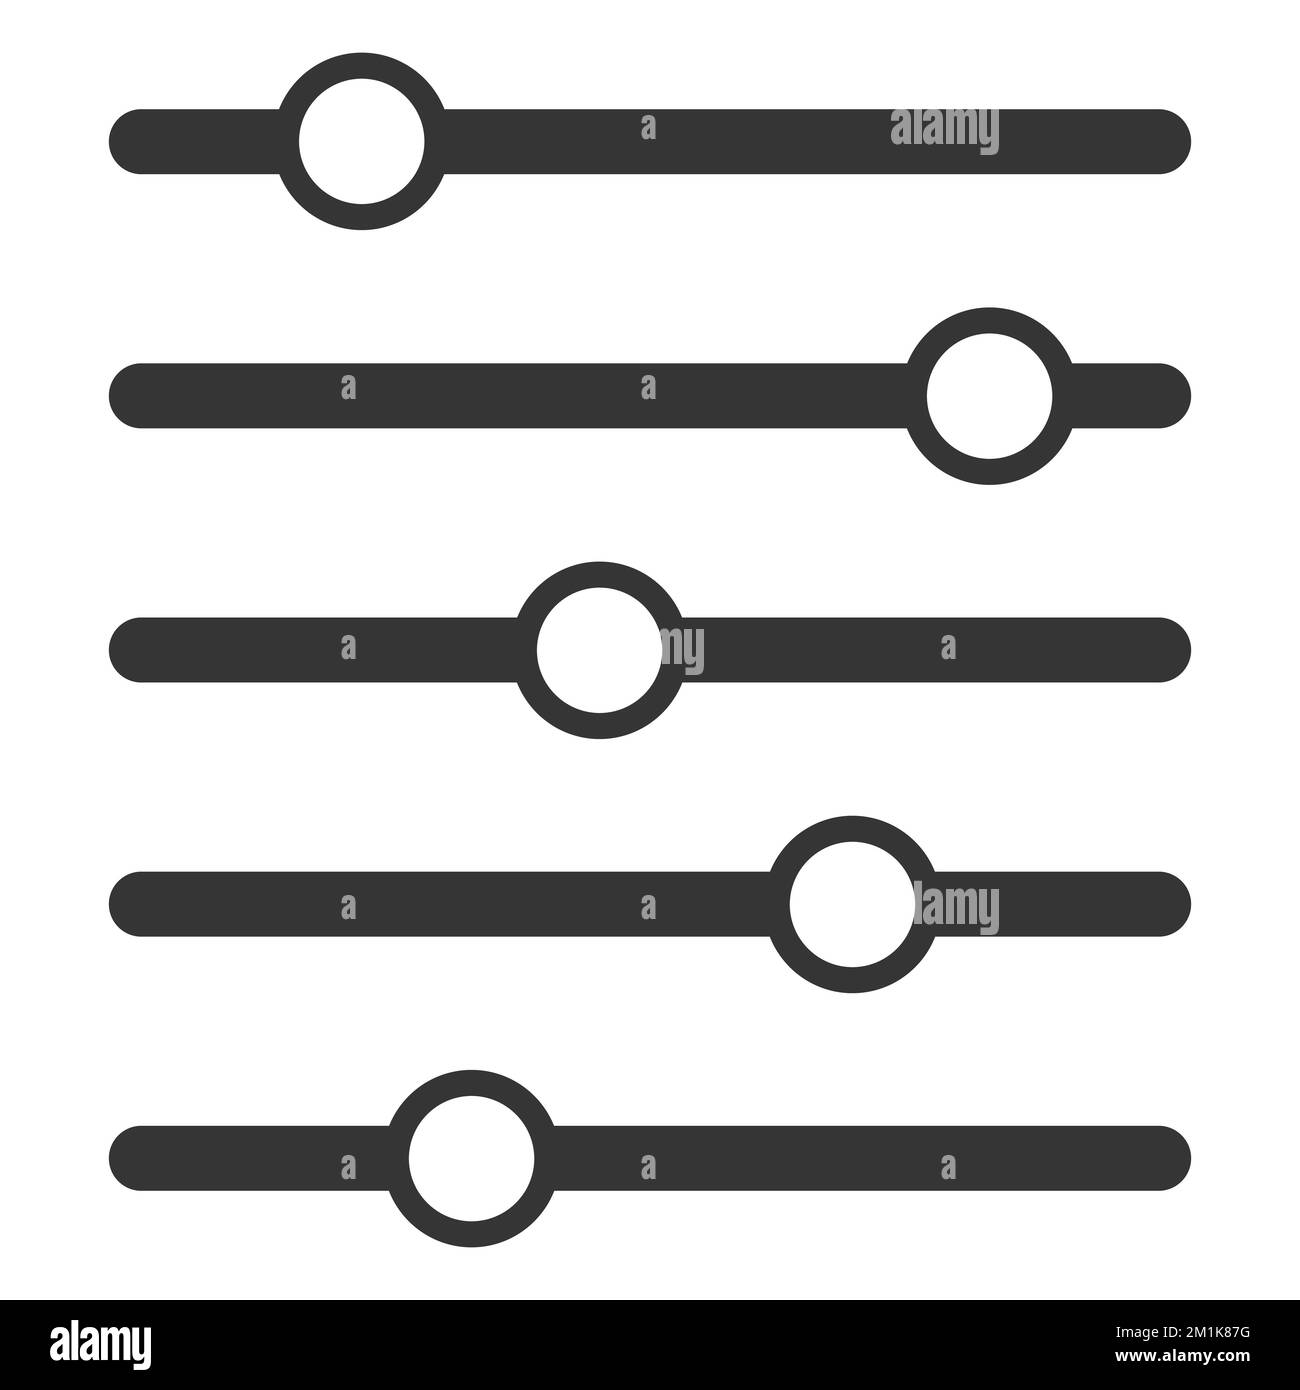 Sound equalizer music, icon mixer equalizer, switcher black control logo Stock Vector